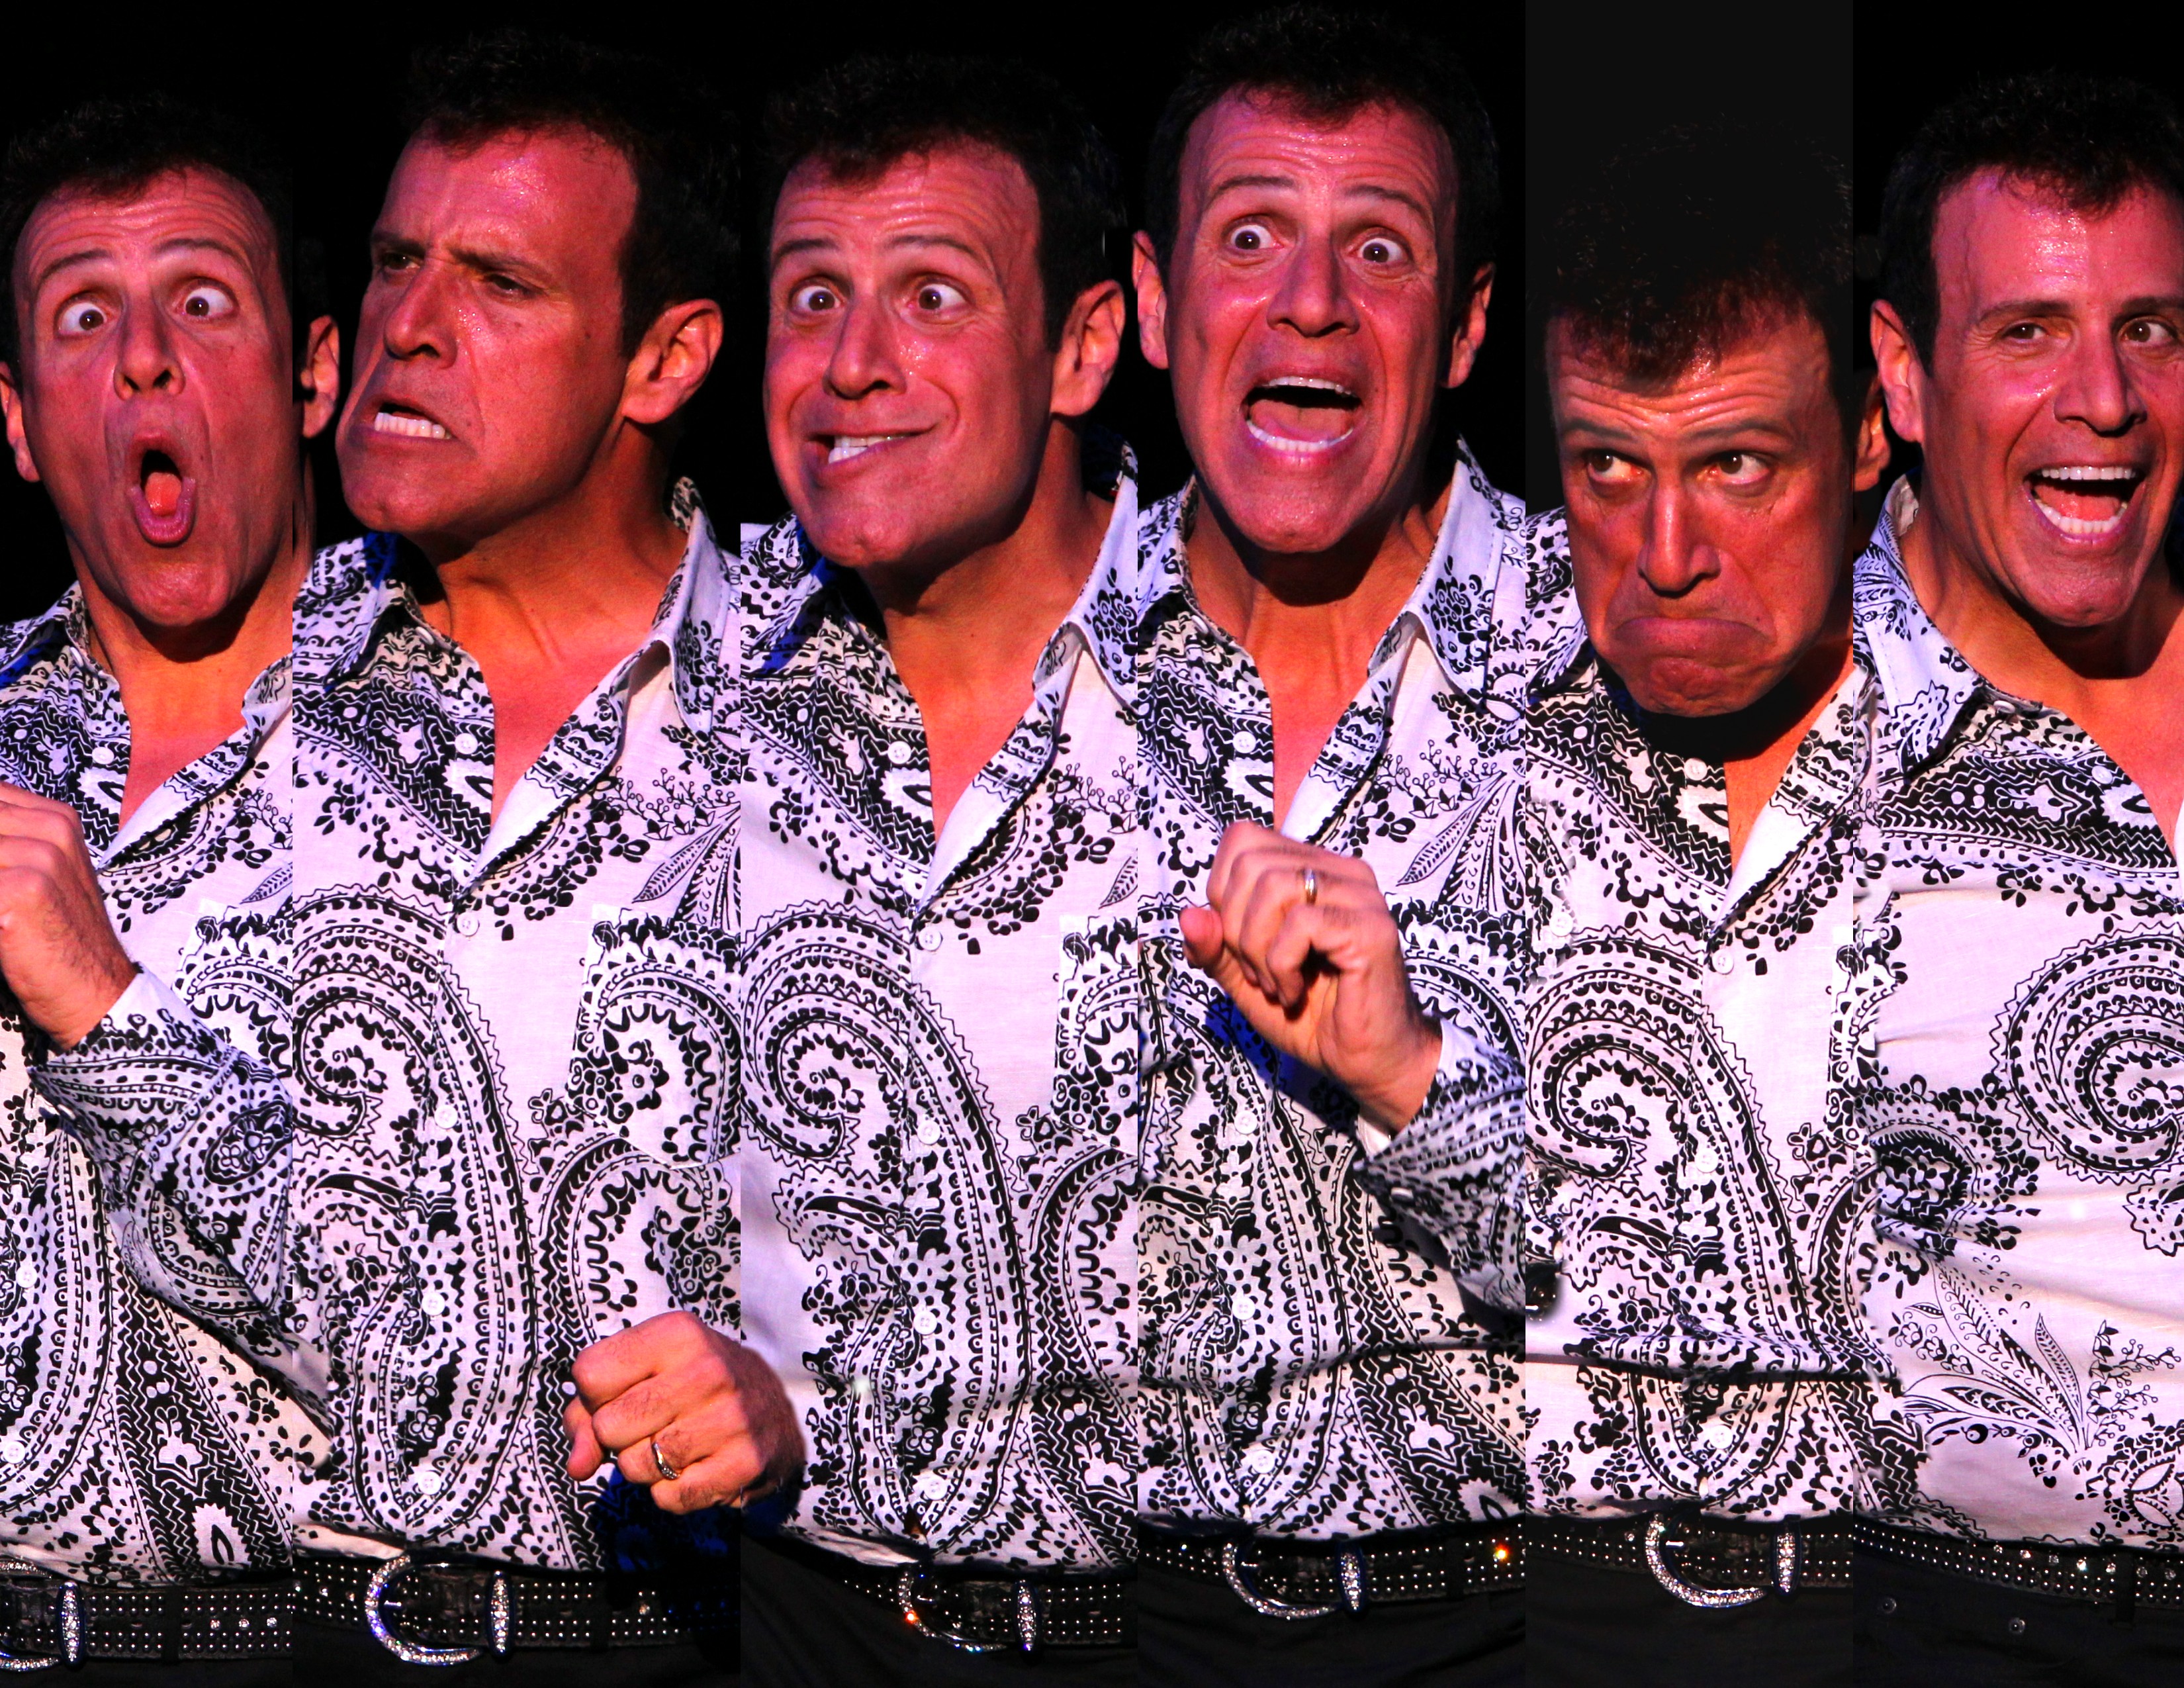 Faces and expressions during recent performance